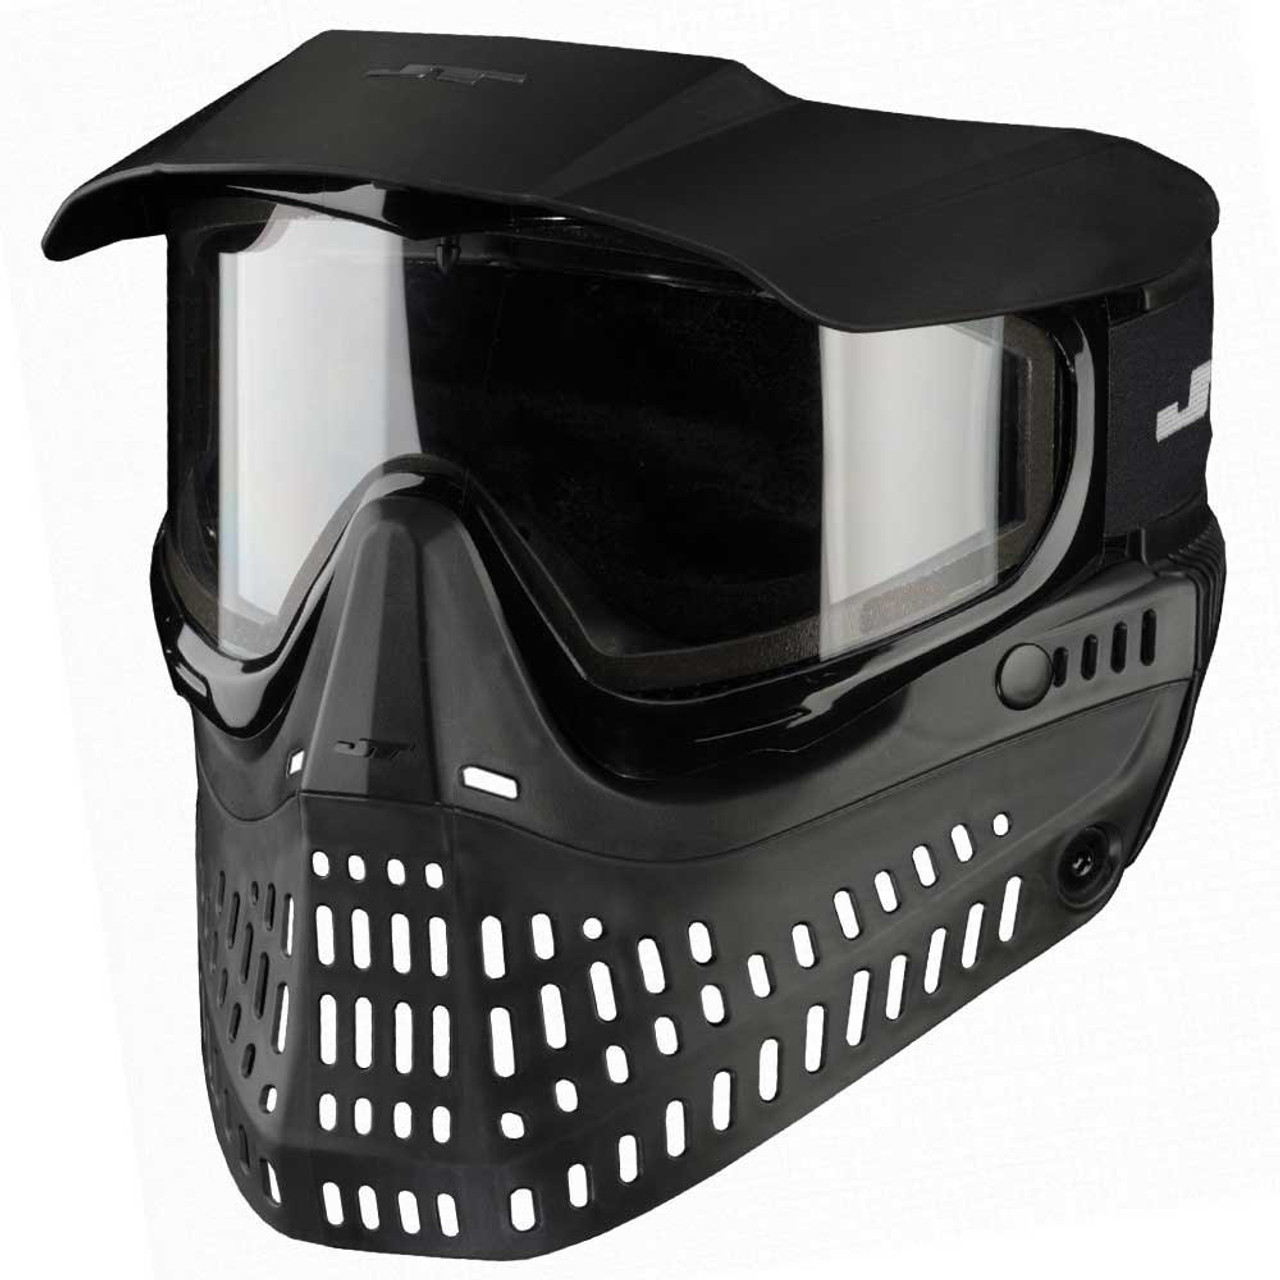 JT Spectra Paintball Mask Thermal - Black Badlands Paintball Gear Canada